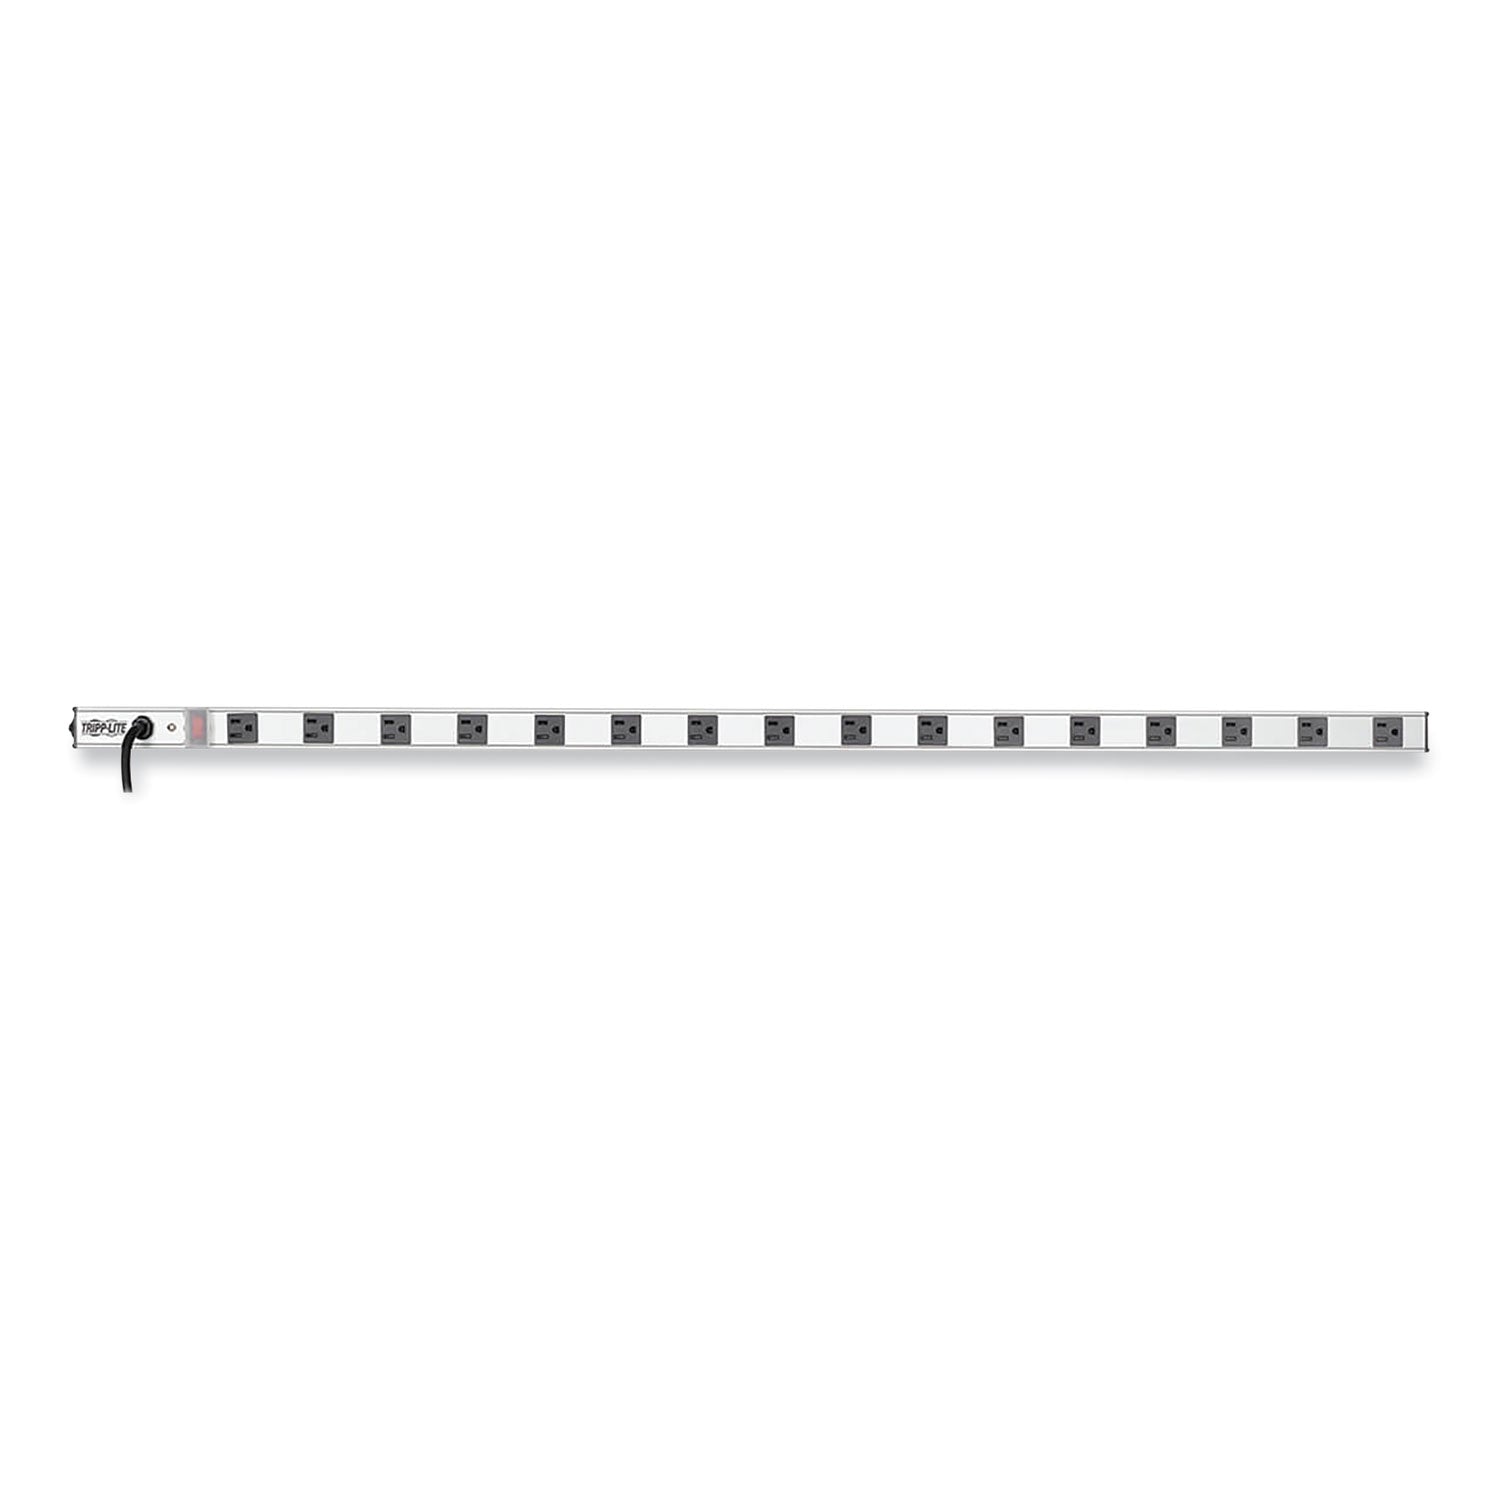 Vertical Power Strip, 16 Outlets, 15 ft Cord, Silver - 